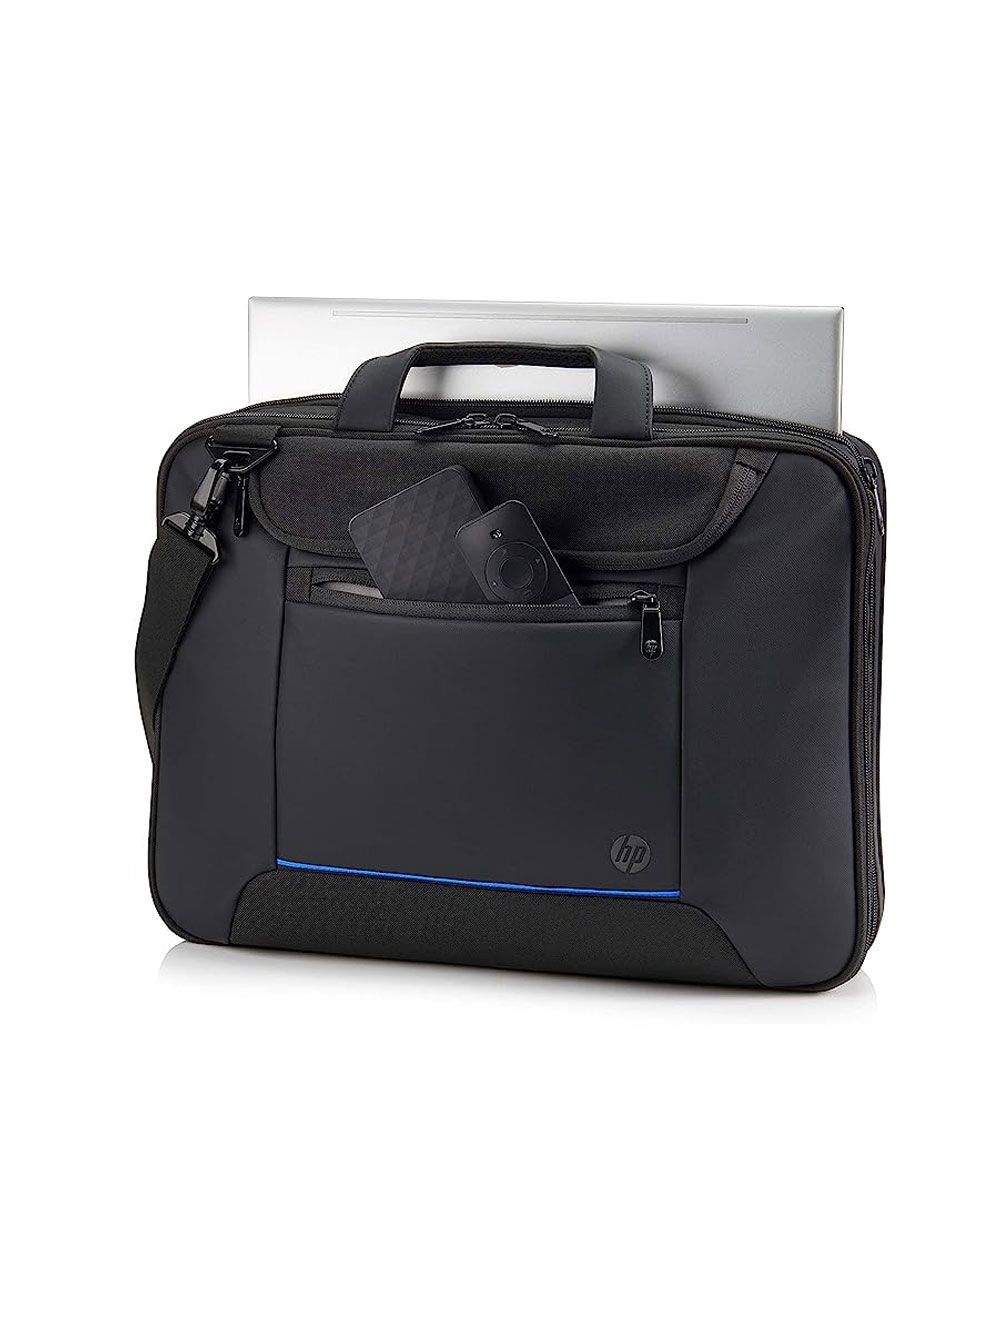 HP 15.6 Recycled Series Top Load Carrying Case 5kn29aa - Black